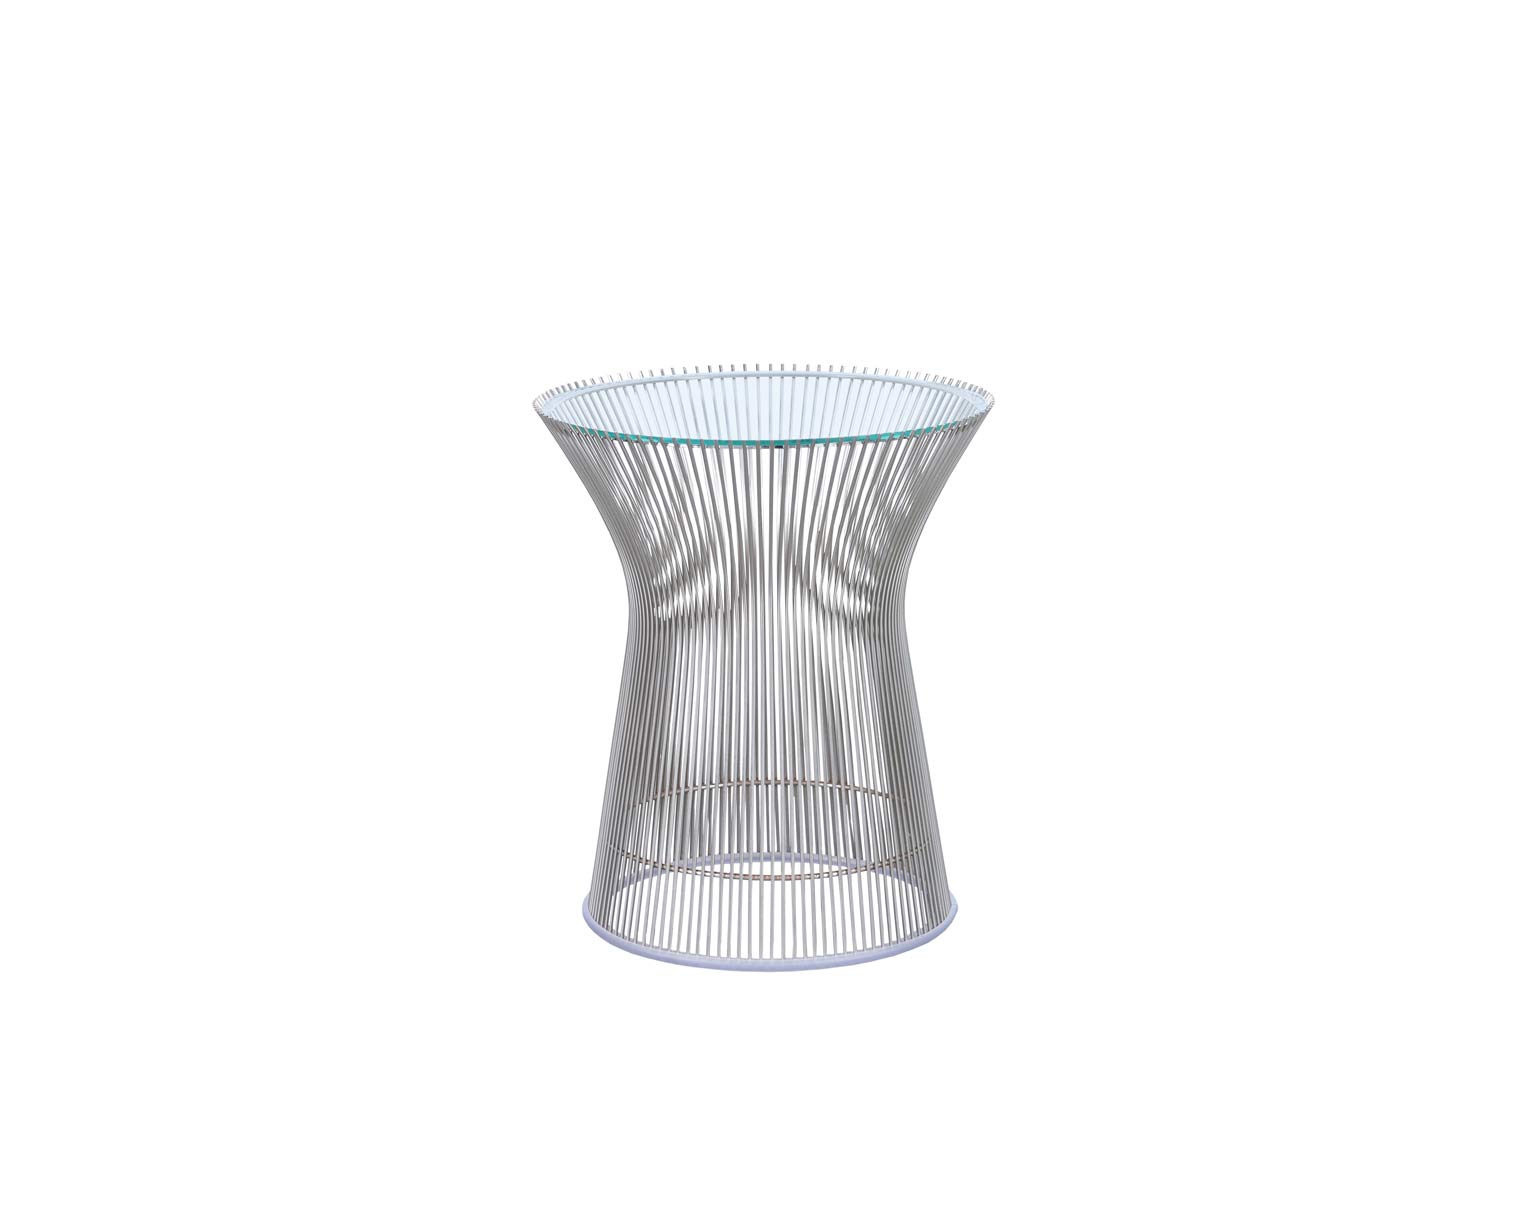 Warren Platner Nickel and Glass Side Table for Knoll